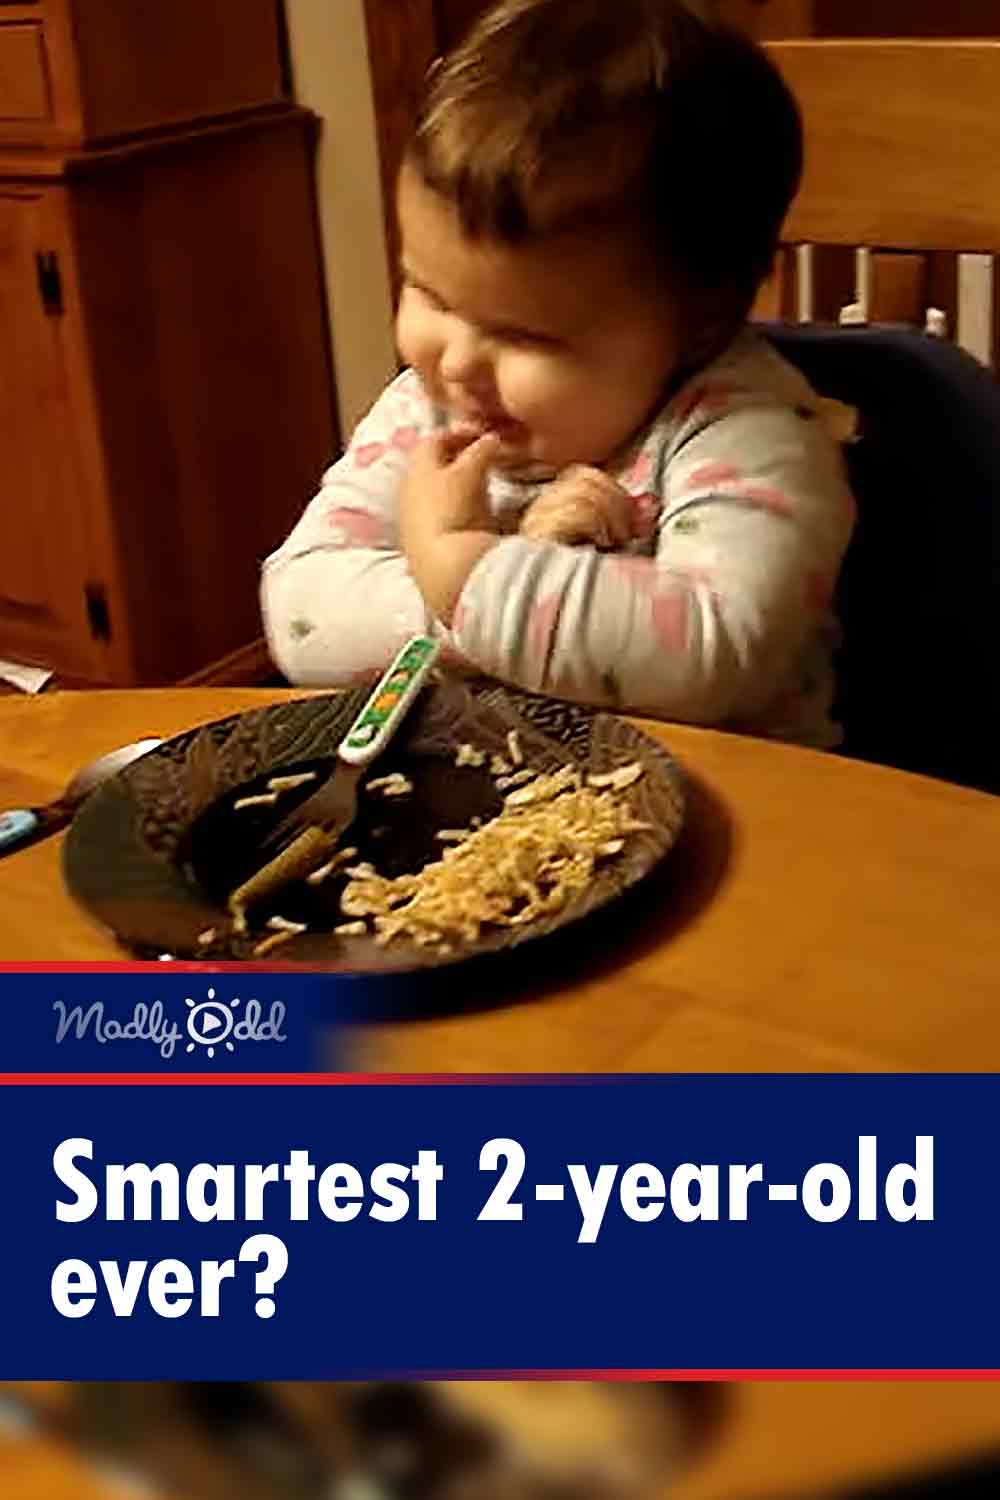 Smartest 2-year-old ever?